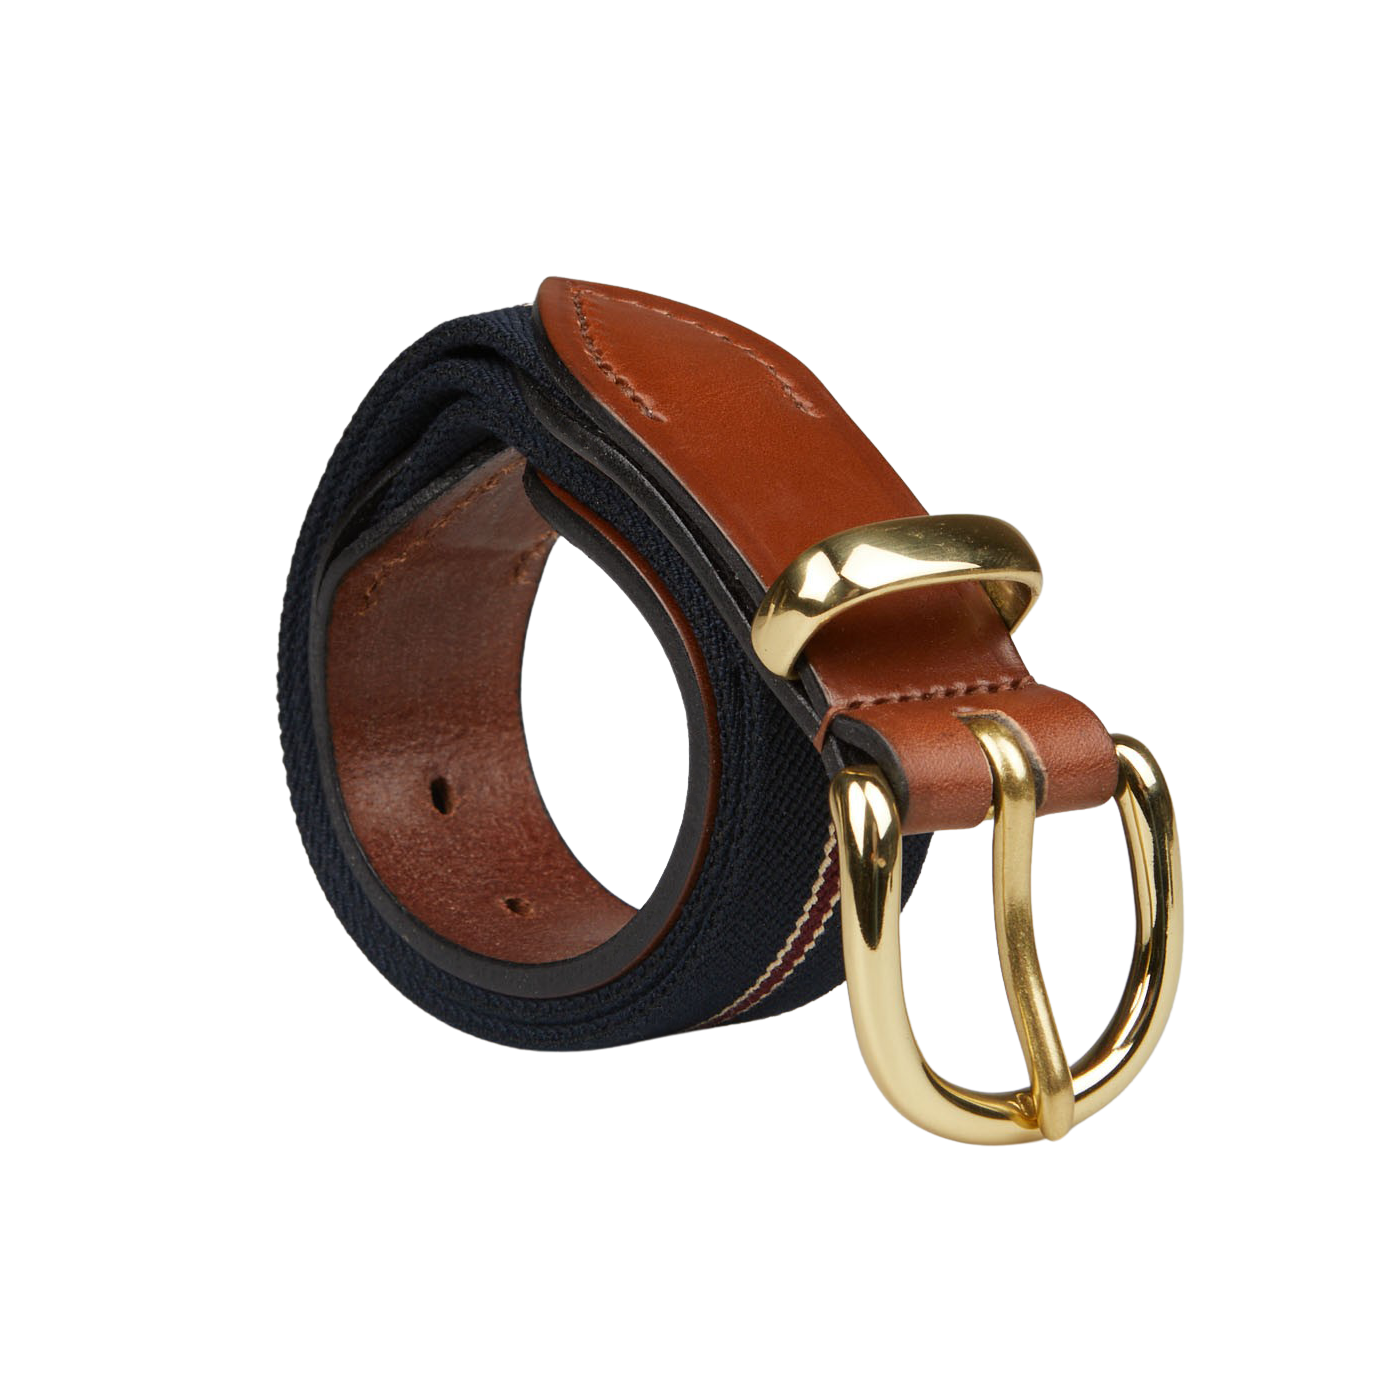 A Hardy & Parsons Navy Striped Canvas Cognac Leather 35mm Belt with a gold buckle.